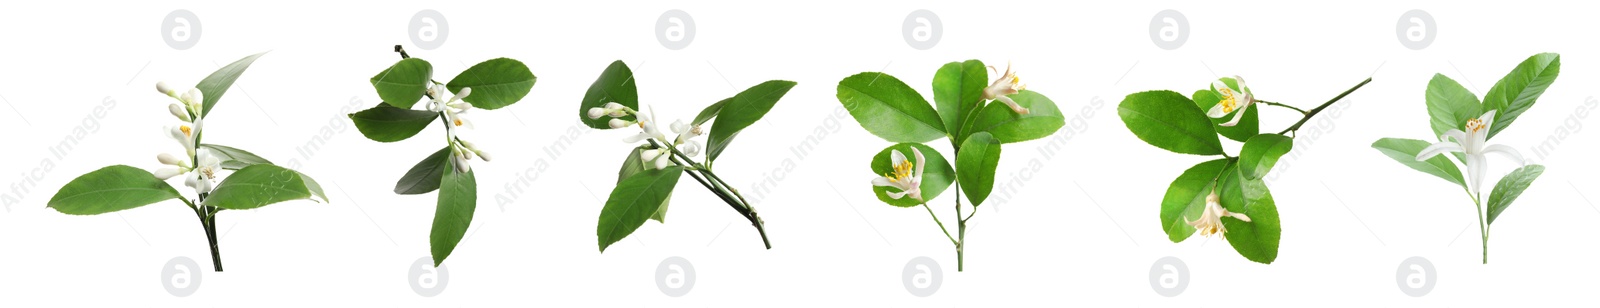 Image of Set of beautiful blooming citrus flowers with green leaves on white background. Banner design